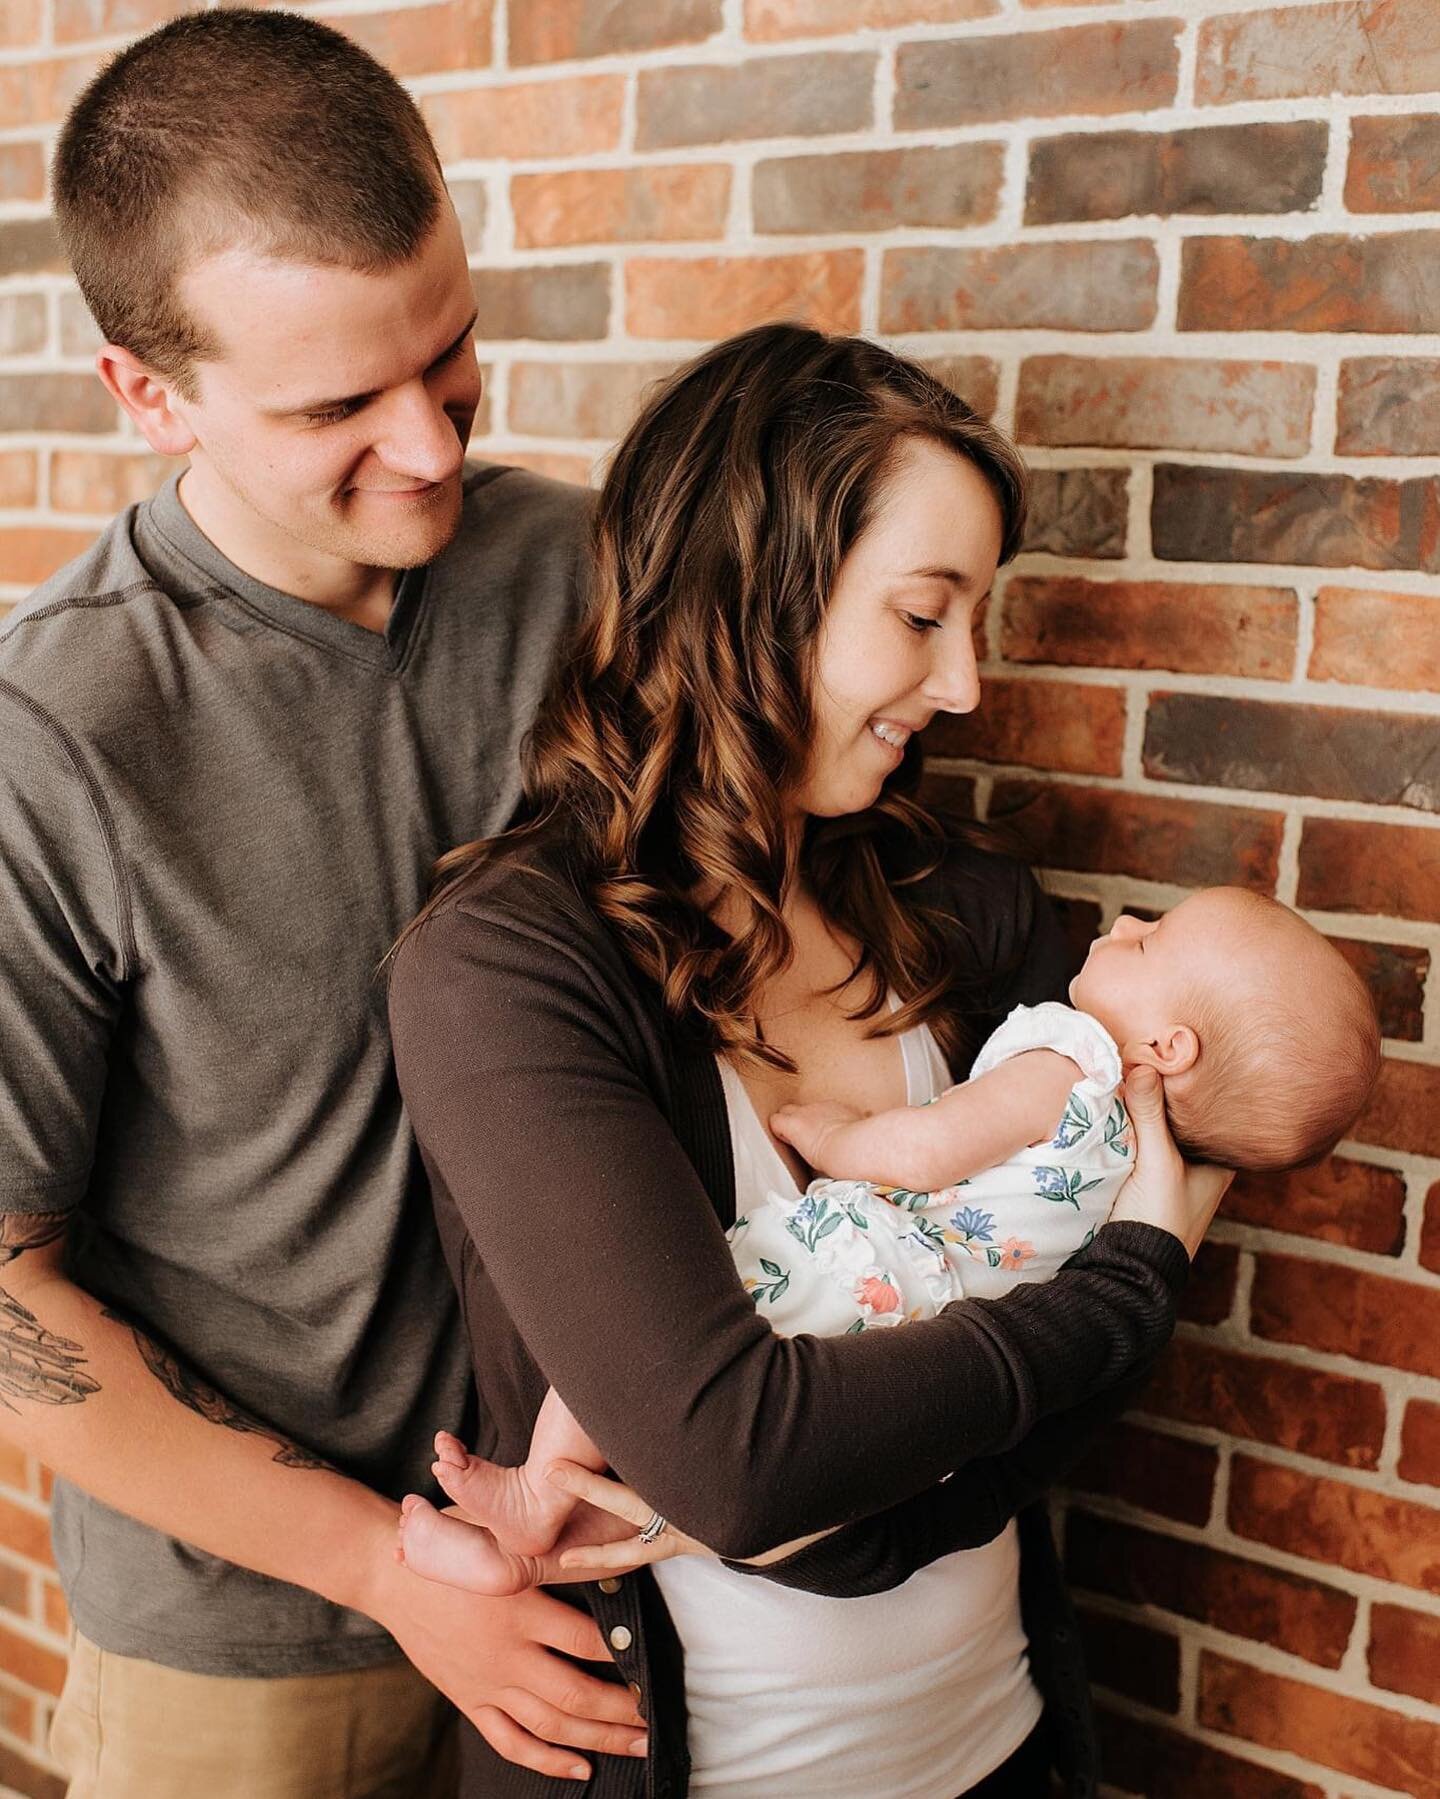 3 tips for a relaxed newborn shoot:

1. Prepare.

Home: Make sure all the rooms you want to use are cleaned up ahead of time and outfits picked out. 

Studio: Pack your things the night before.

2. Feed baby before the photoshoot starts. Time is buil